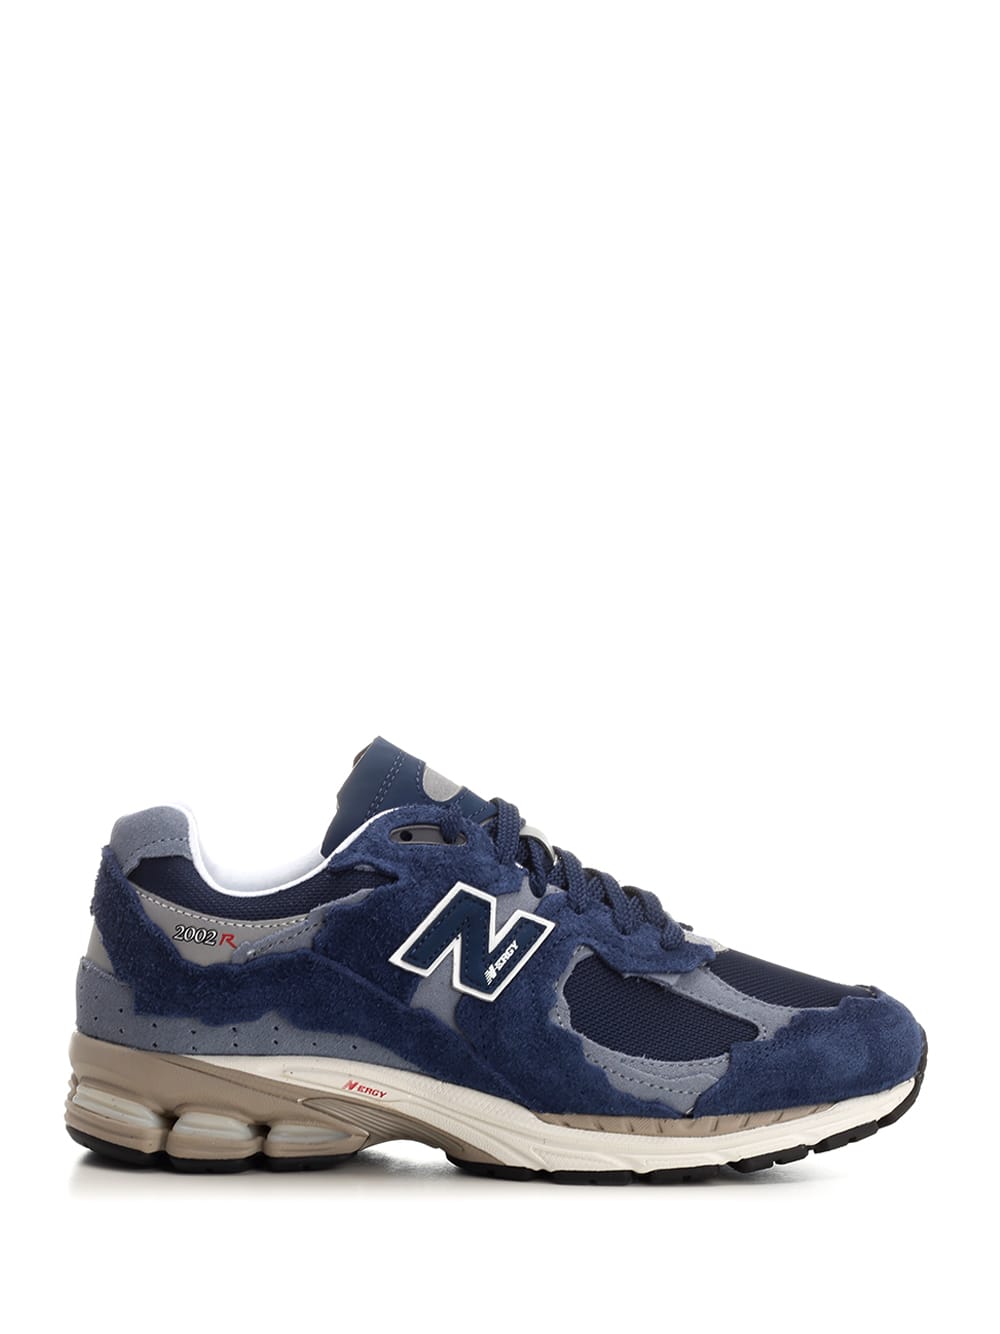 NEW BALANCE BLUE 2002 SNEAKERS